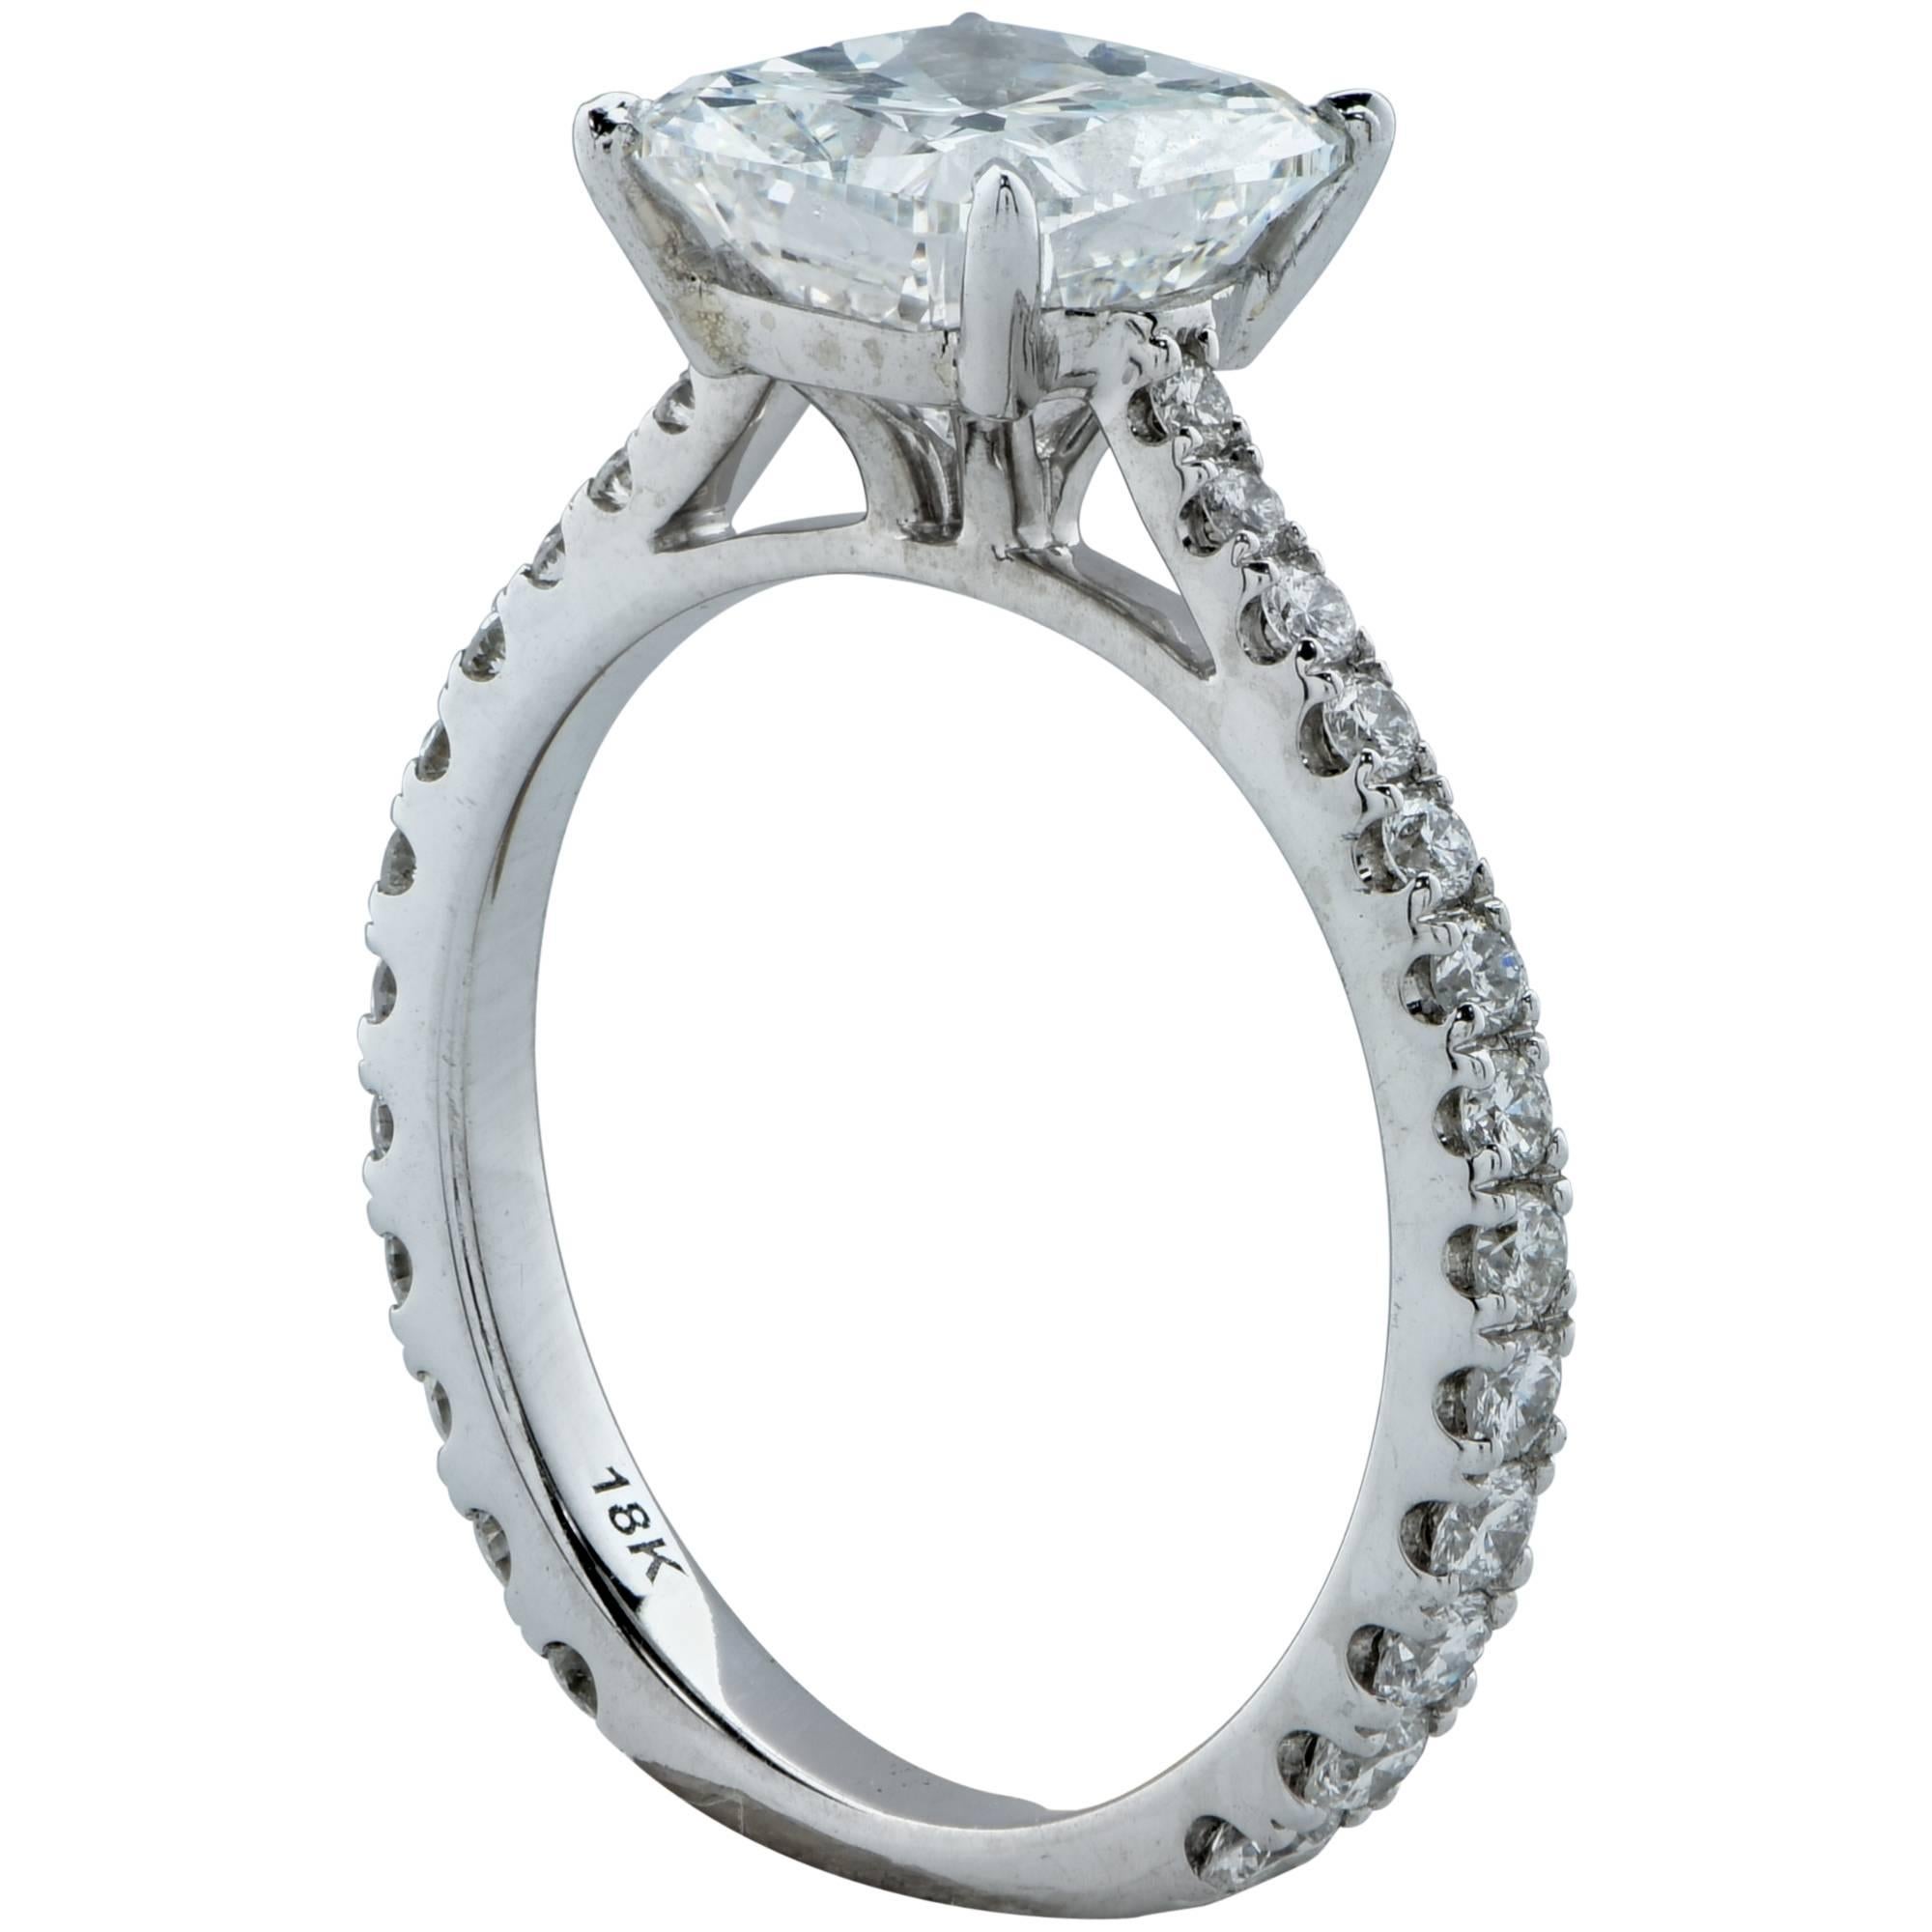 This beautiful 18k white gold engagement ring features a GIA graded 2.01ct F color SI1 clarity cushion cut diamond 100% eye clean with very good polish and symmetry. It is accented by 26 round brilliant cut diamonds weighing .50cts G color and VS